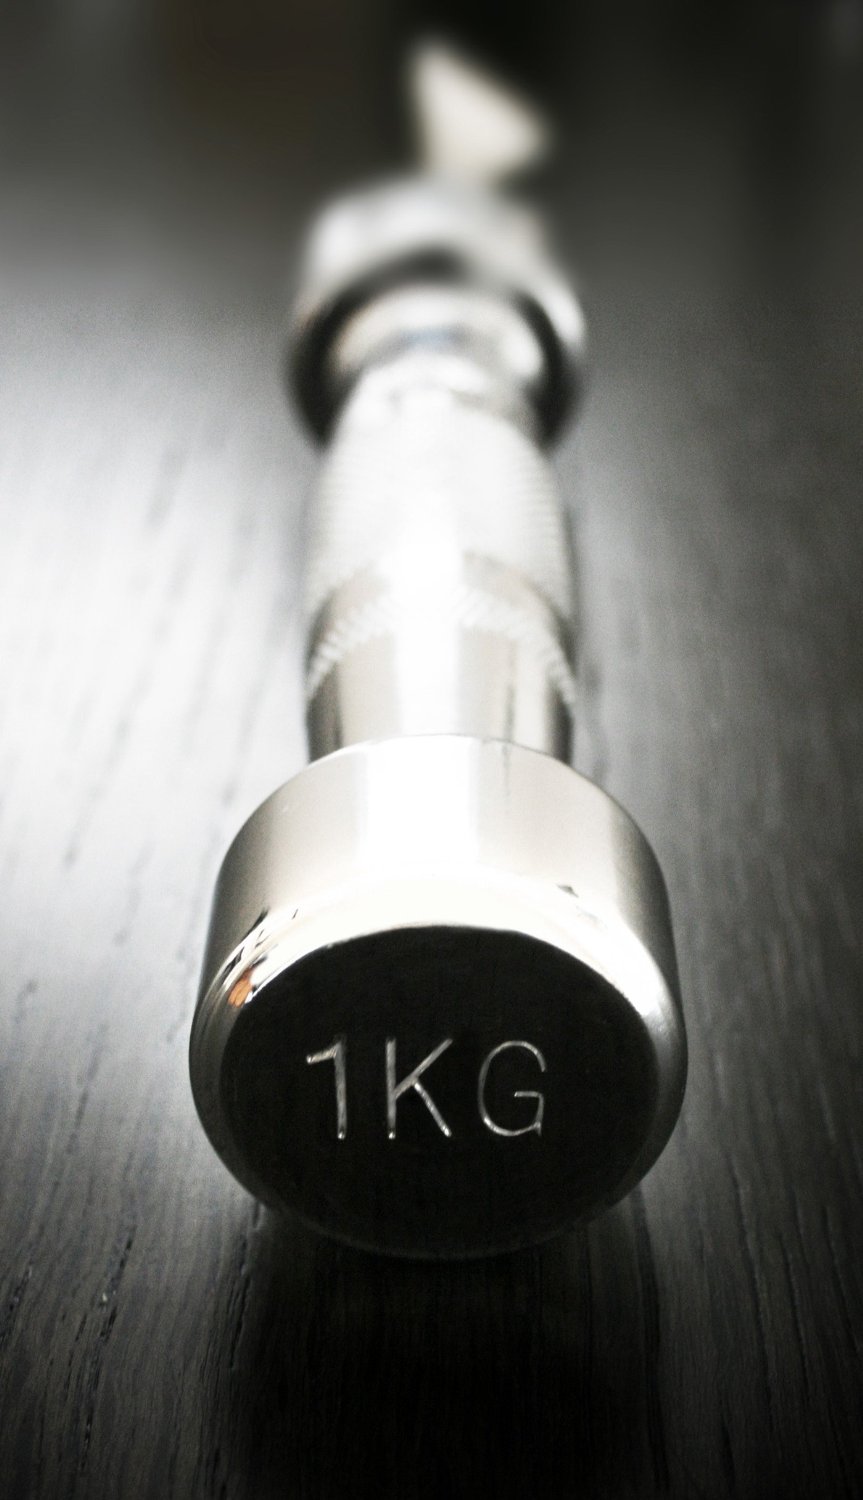 dumbbell-cutlery-eat-fit-06